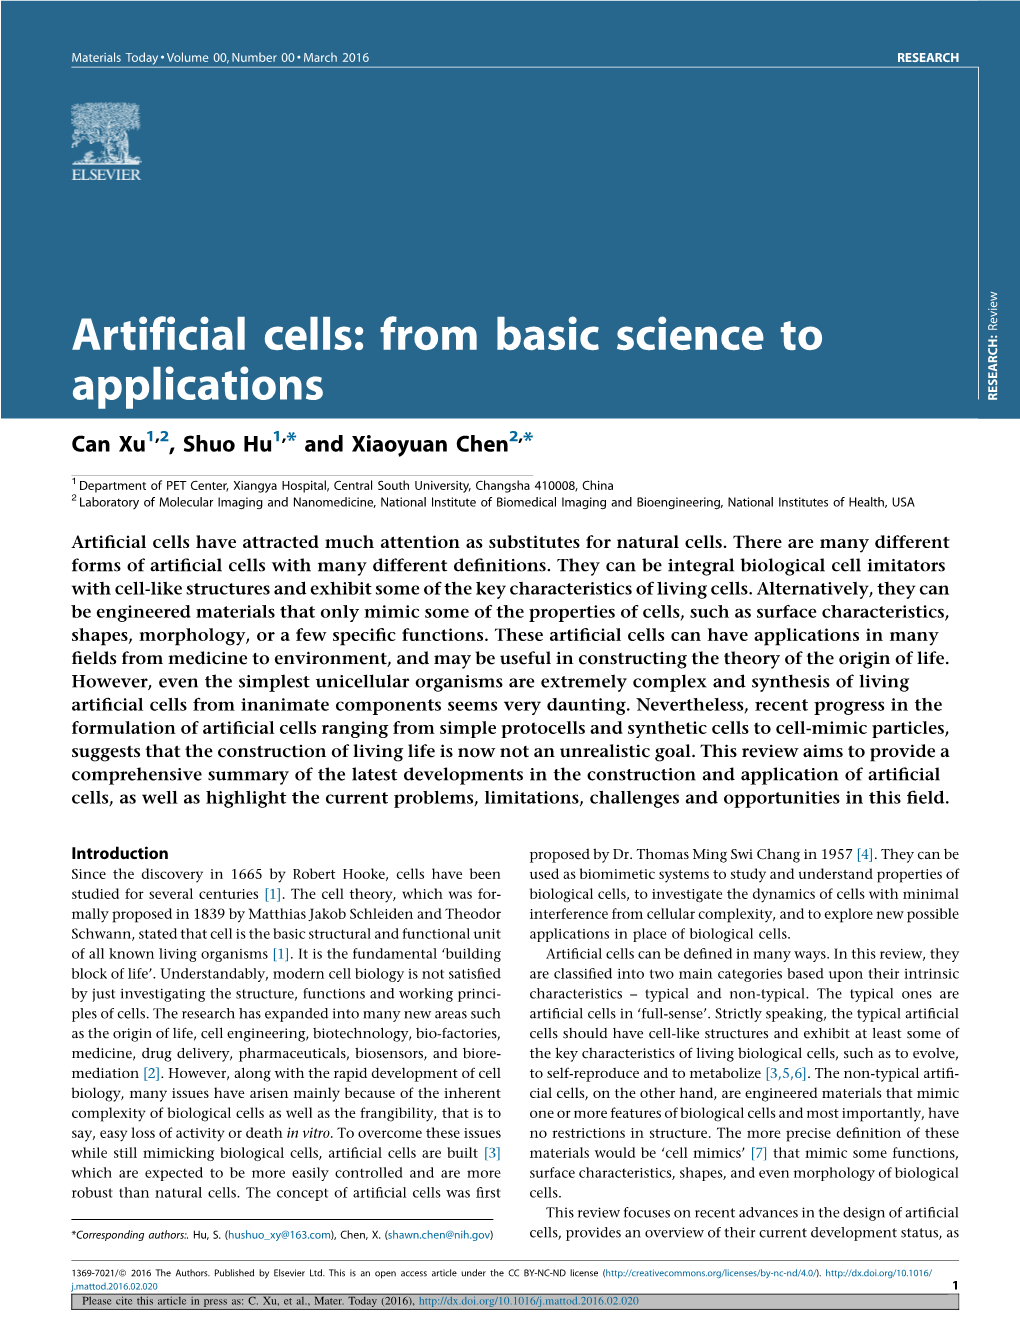 Artificial Cells: from Basic Science to Applications